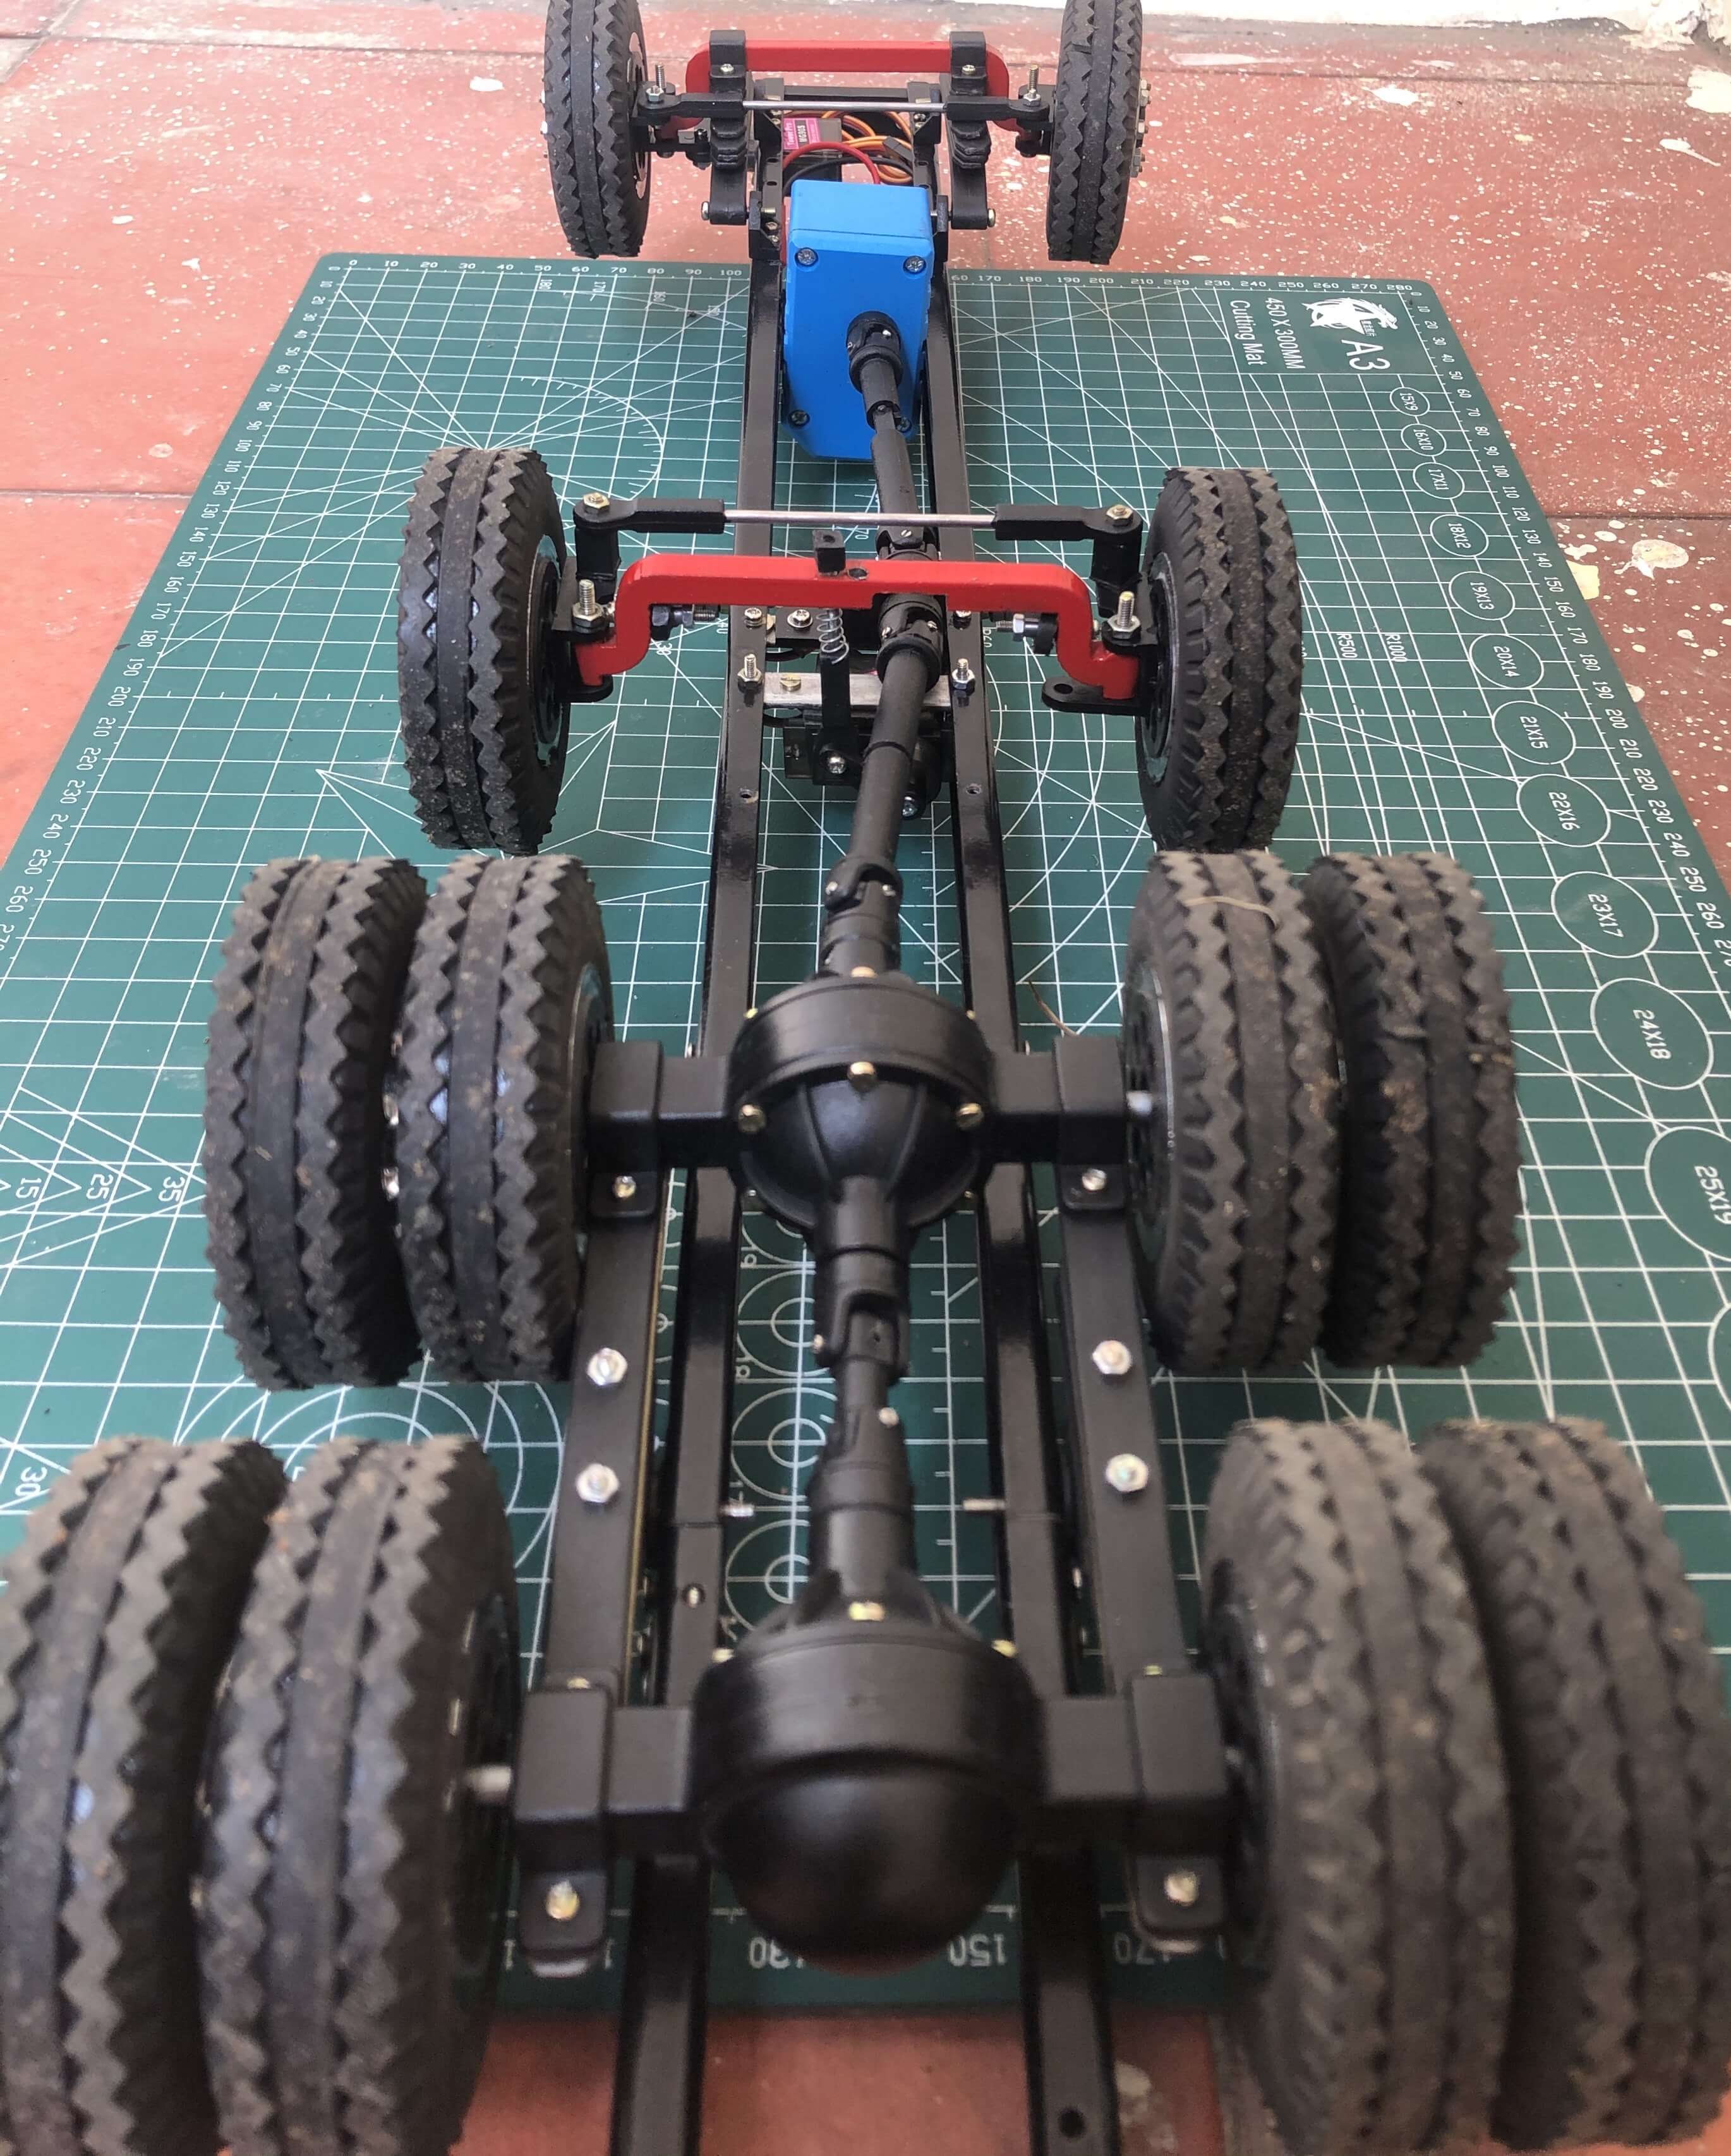 12 Wheel Lift Axle Chassis with Motor-Gearbox and Steering Servo (Rear Multiaxle Drive) (Scale 1:18)